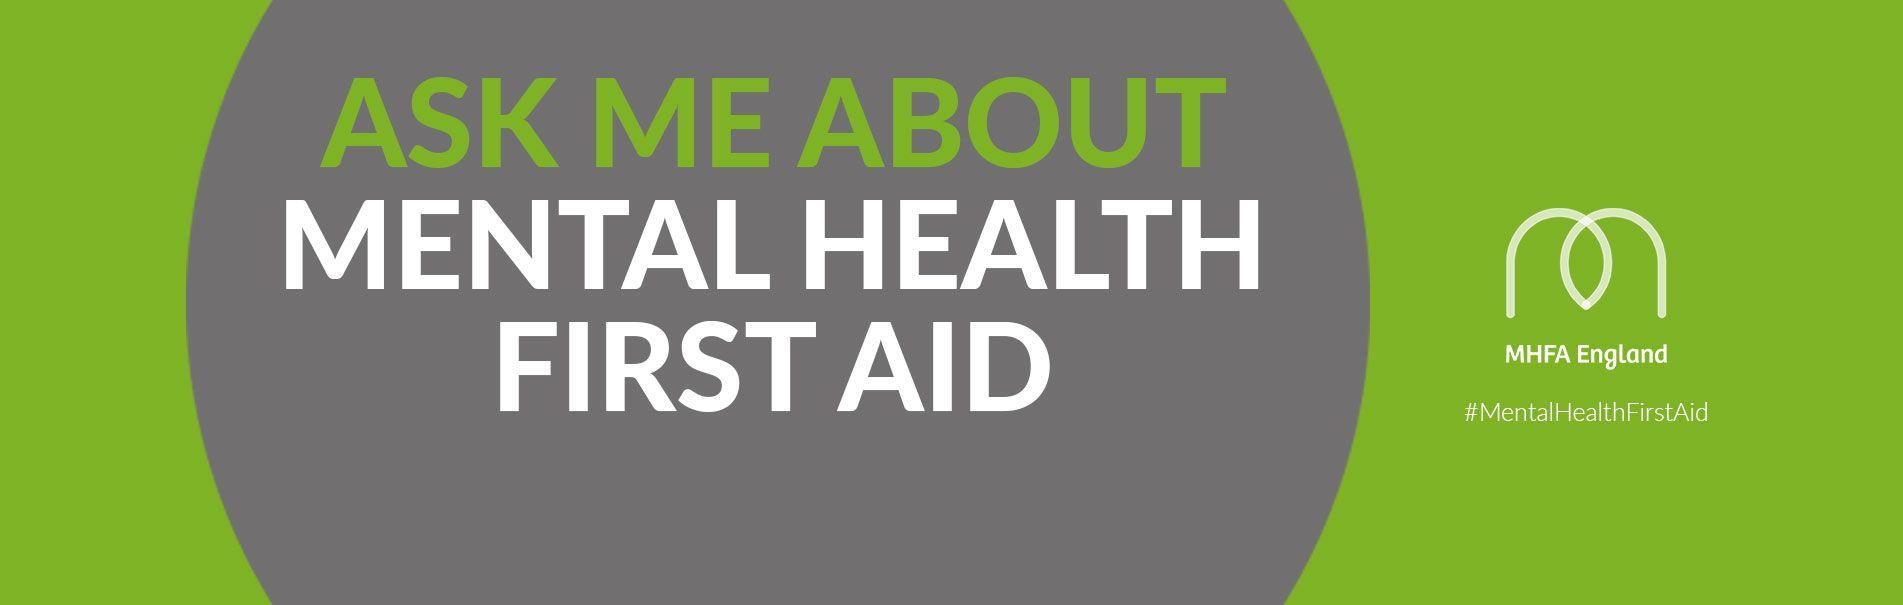 Mental Health First Aid Logo - About the Network - Mental Health First Contact Network - Human ...